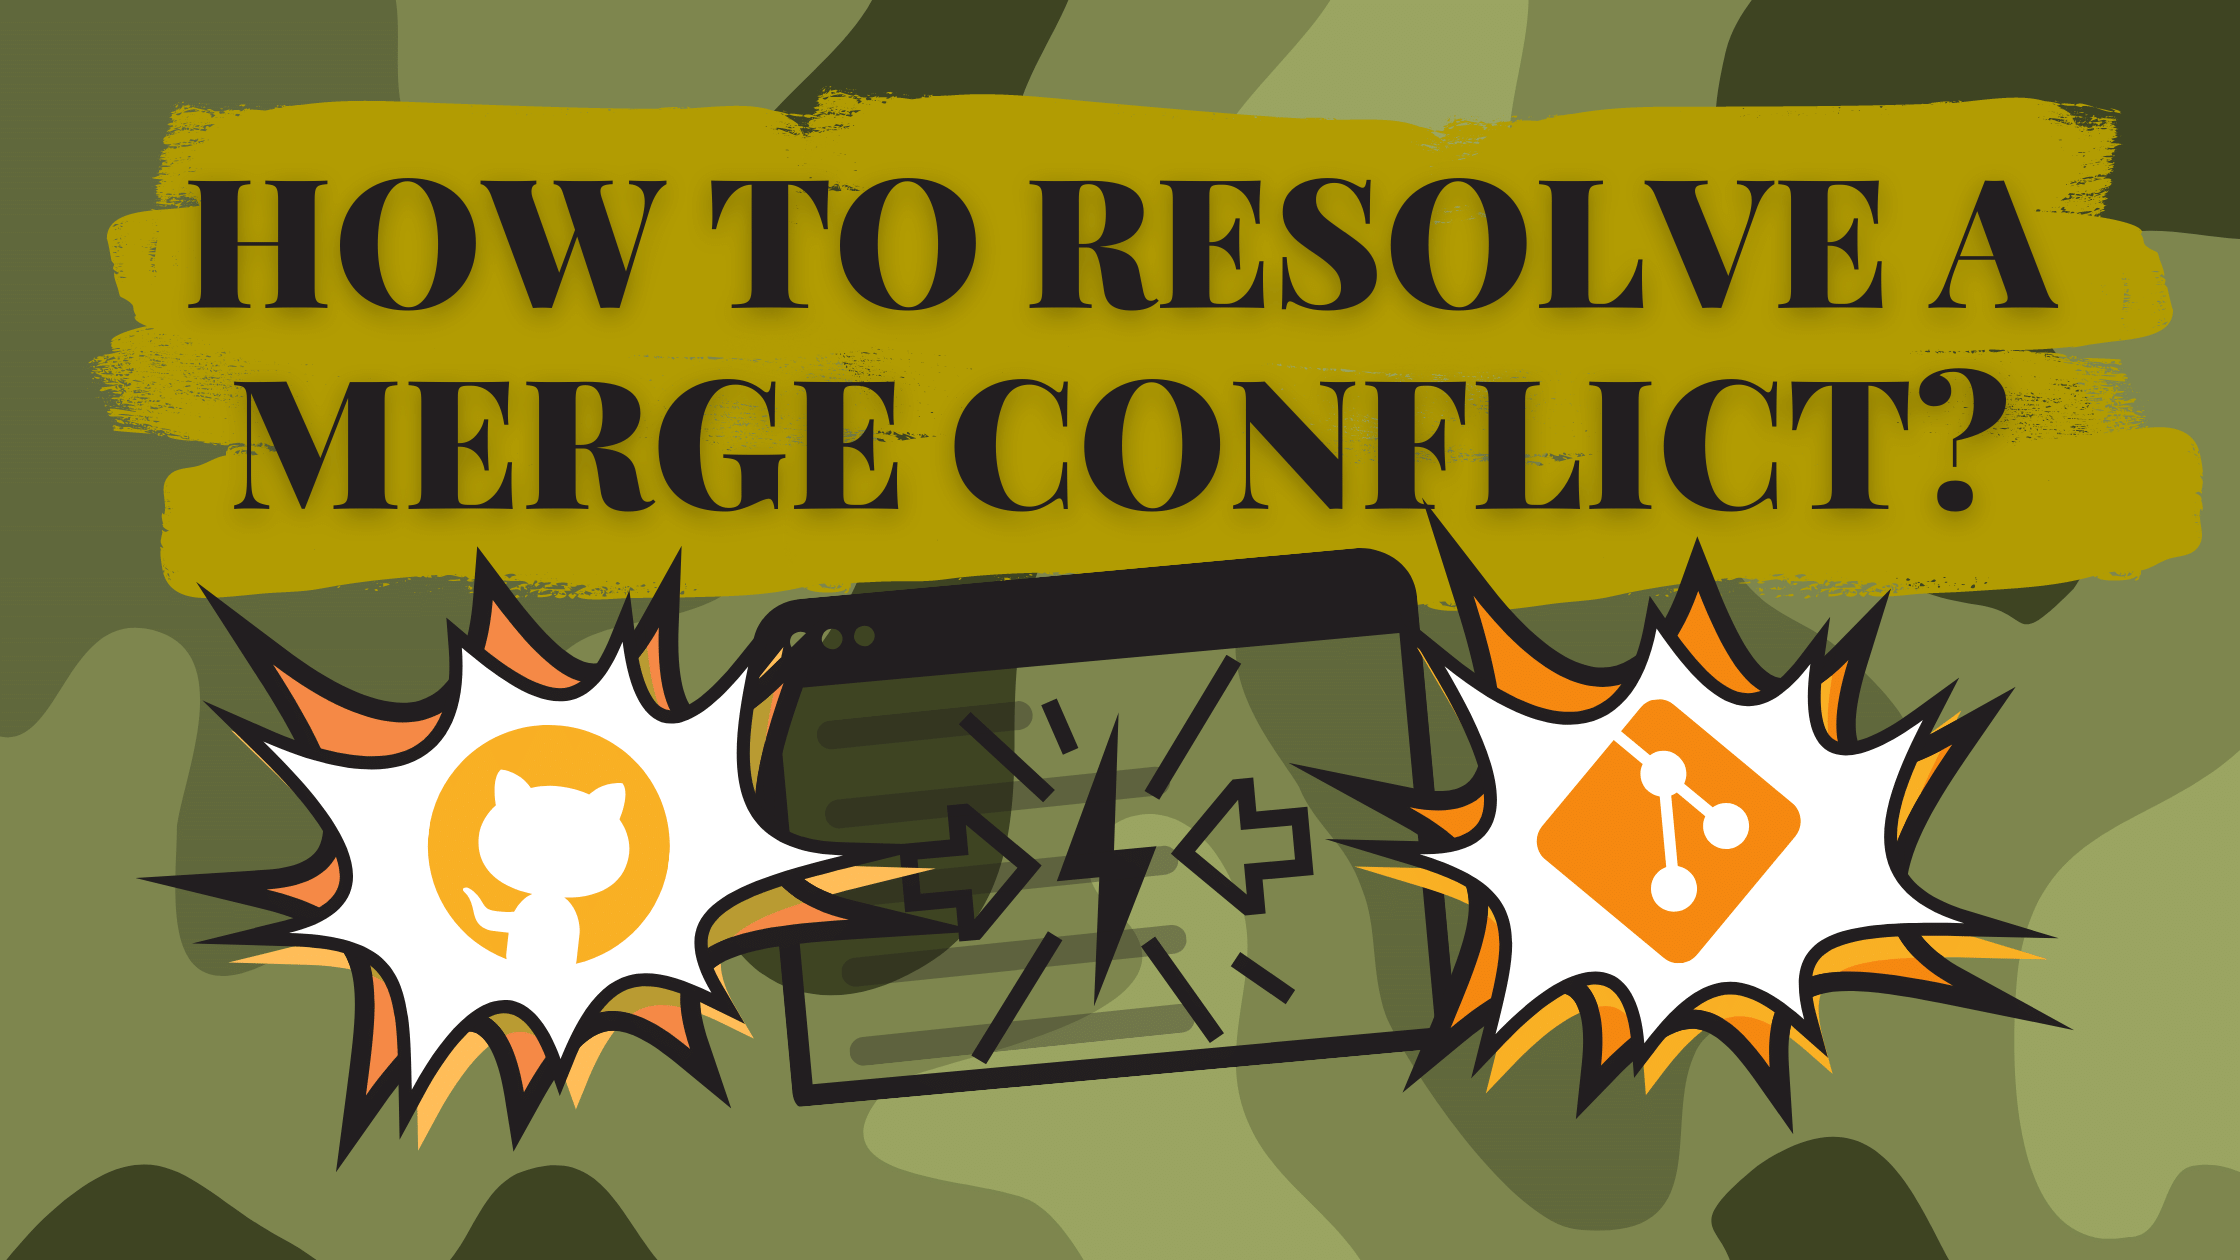 How to Resolve a Merge Conflict?